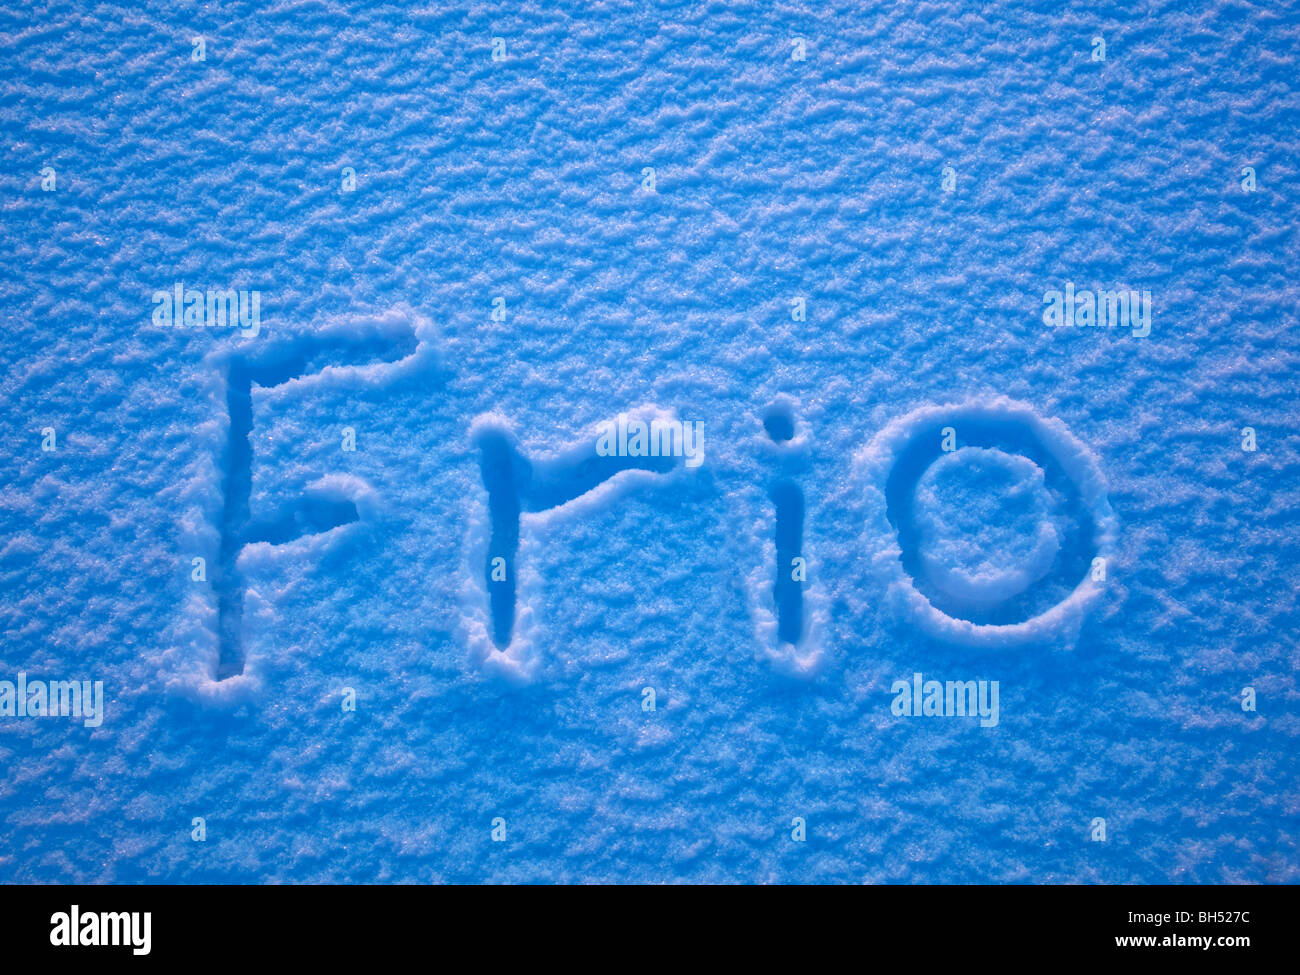 the Spanish word for cold - Frio - spelled out in the snow Stock Photo